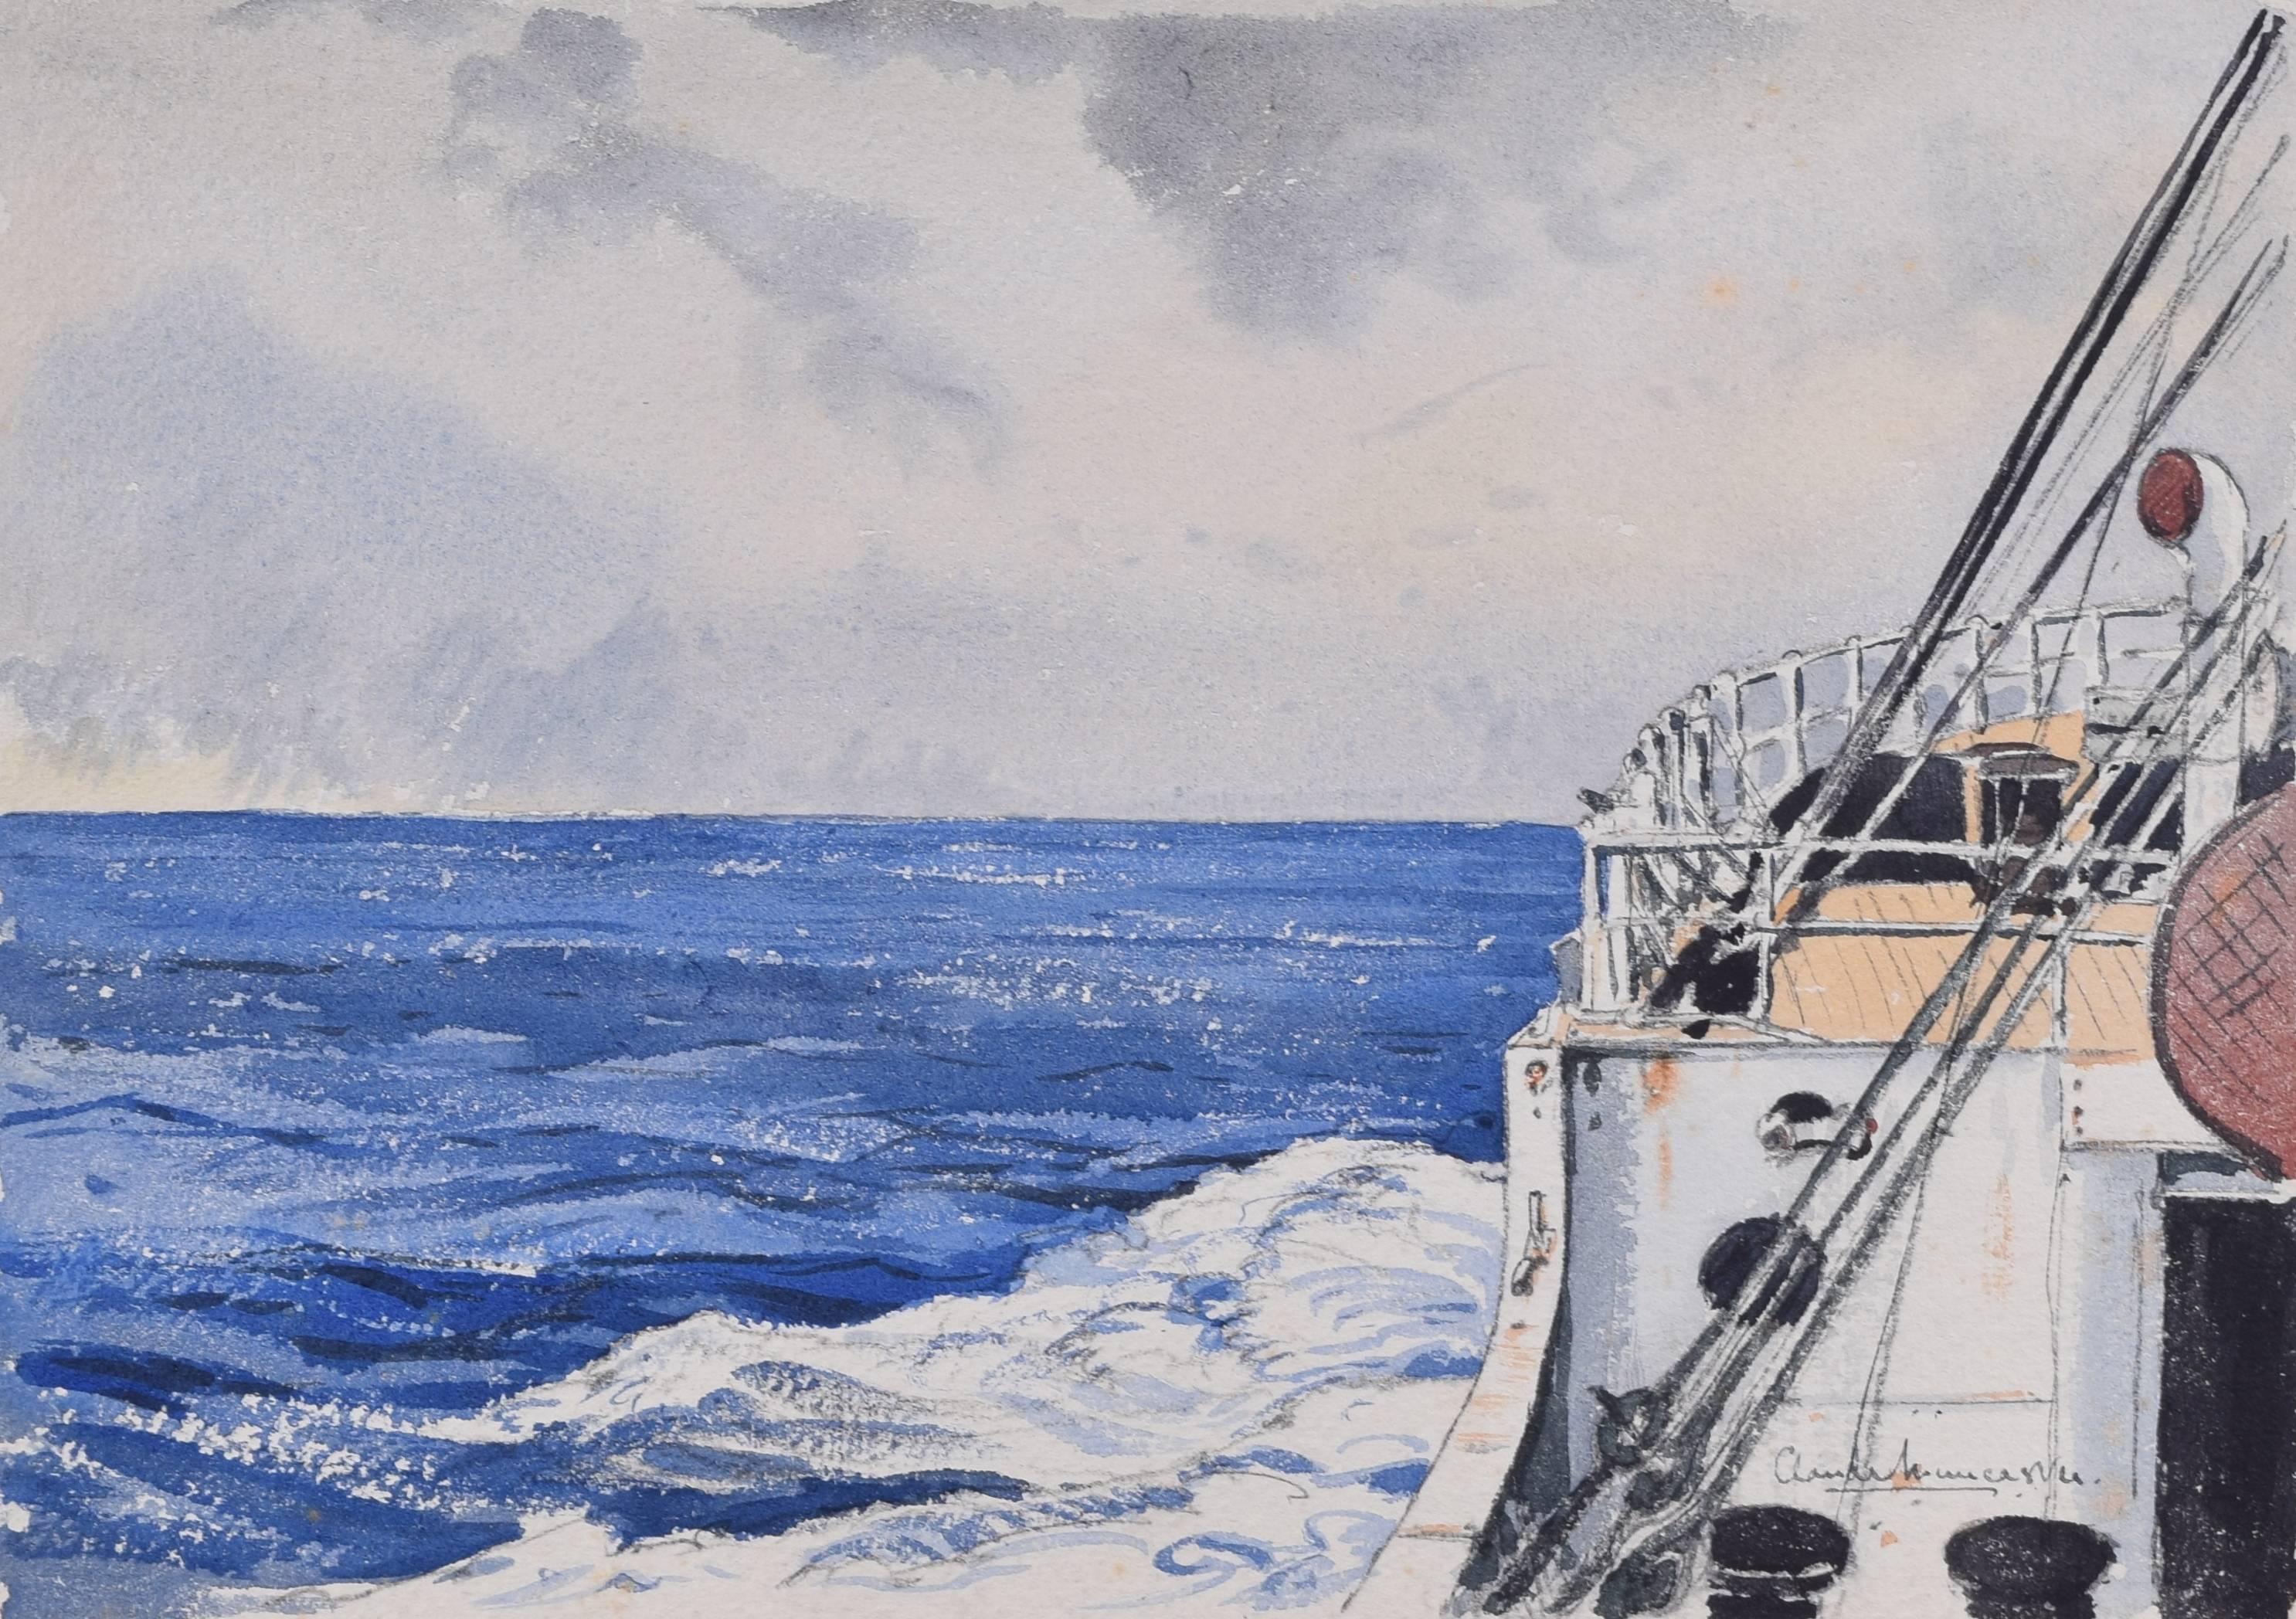 We acquired a series of paintings from Claude Muncaster's studio. To find more scroll down to "More from this Seller" and below it click on "See all from this seller." 

Claude Muncaster (1903-1974)
The Bow Wash
Watercolour
Signed
Provenance: Martin